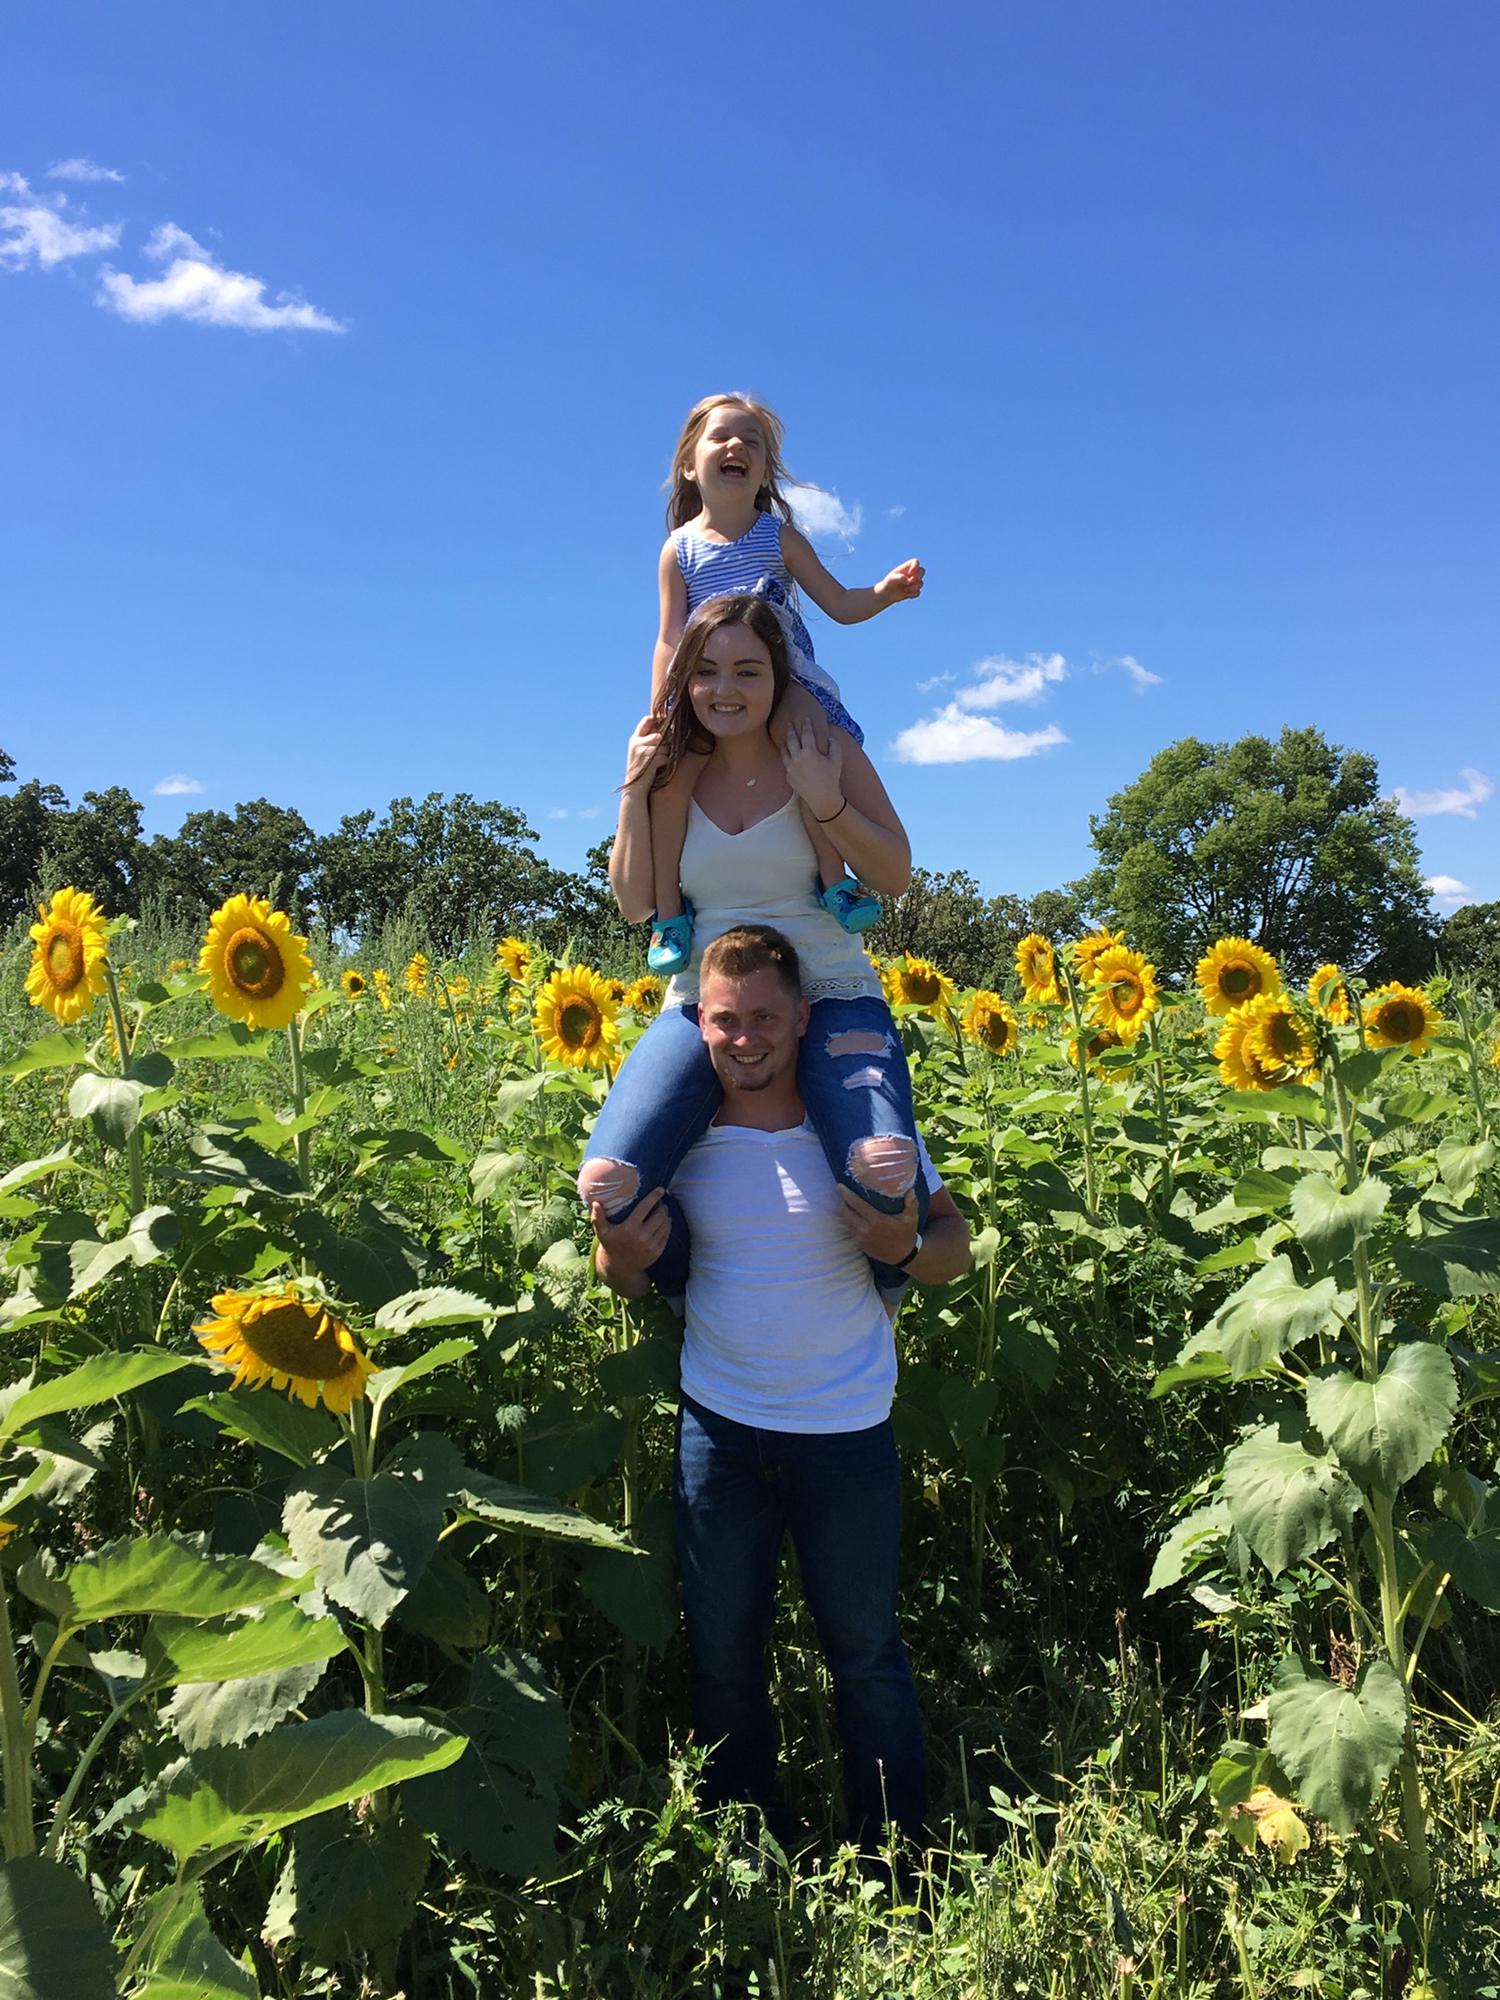 Visiting the sunflower patch, and the first of many “stacked pictures”